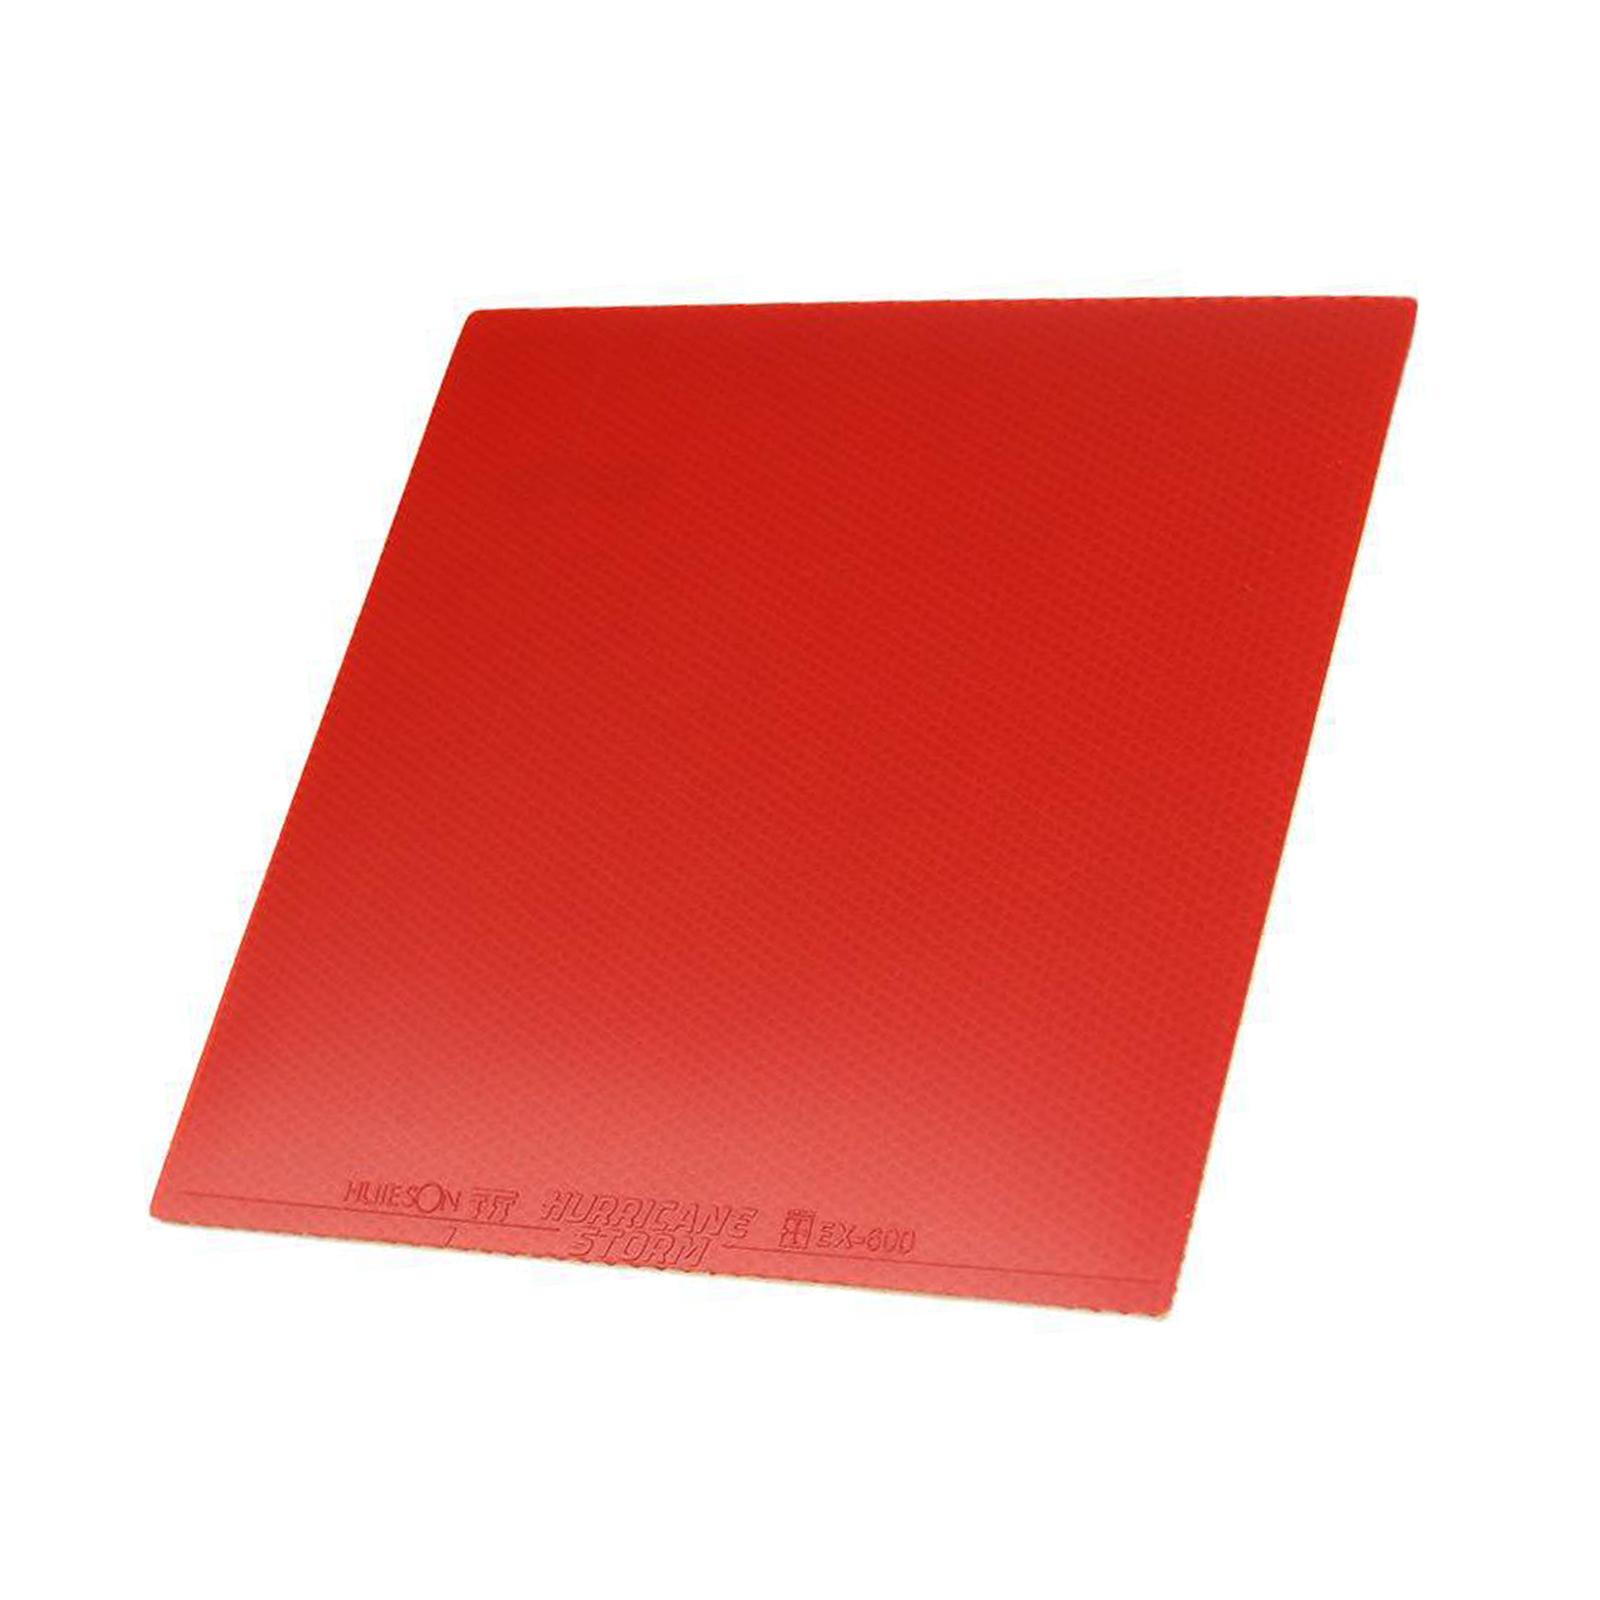 Table Tennis Rubber Professional Women Men Ping Pong Rubber Accessories Red